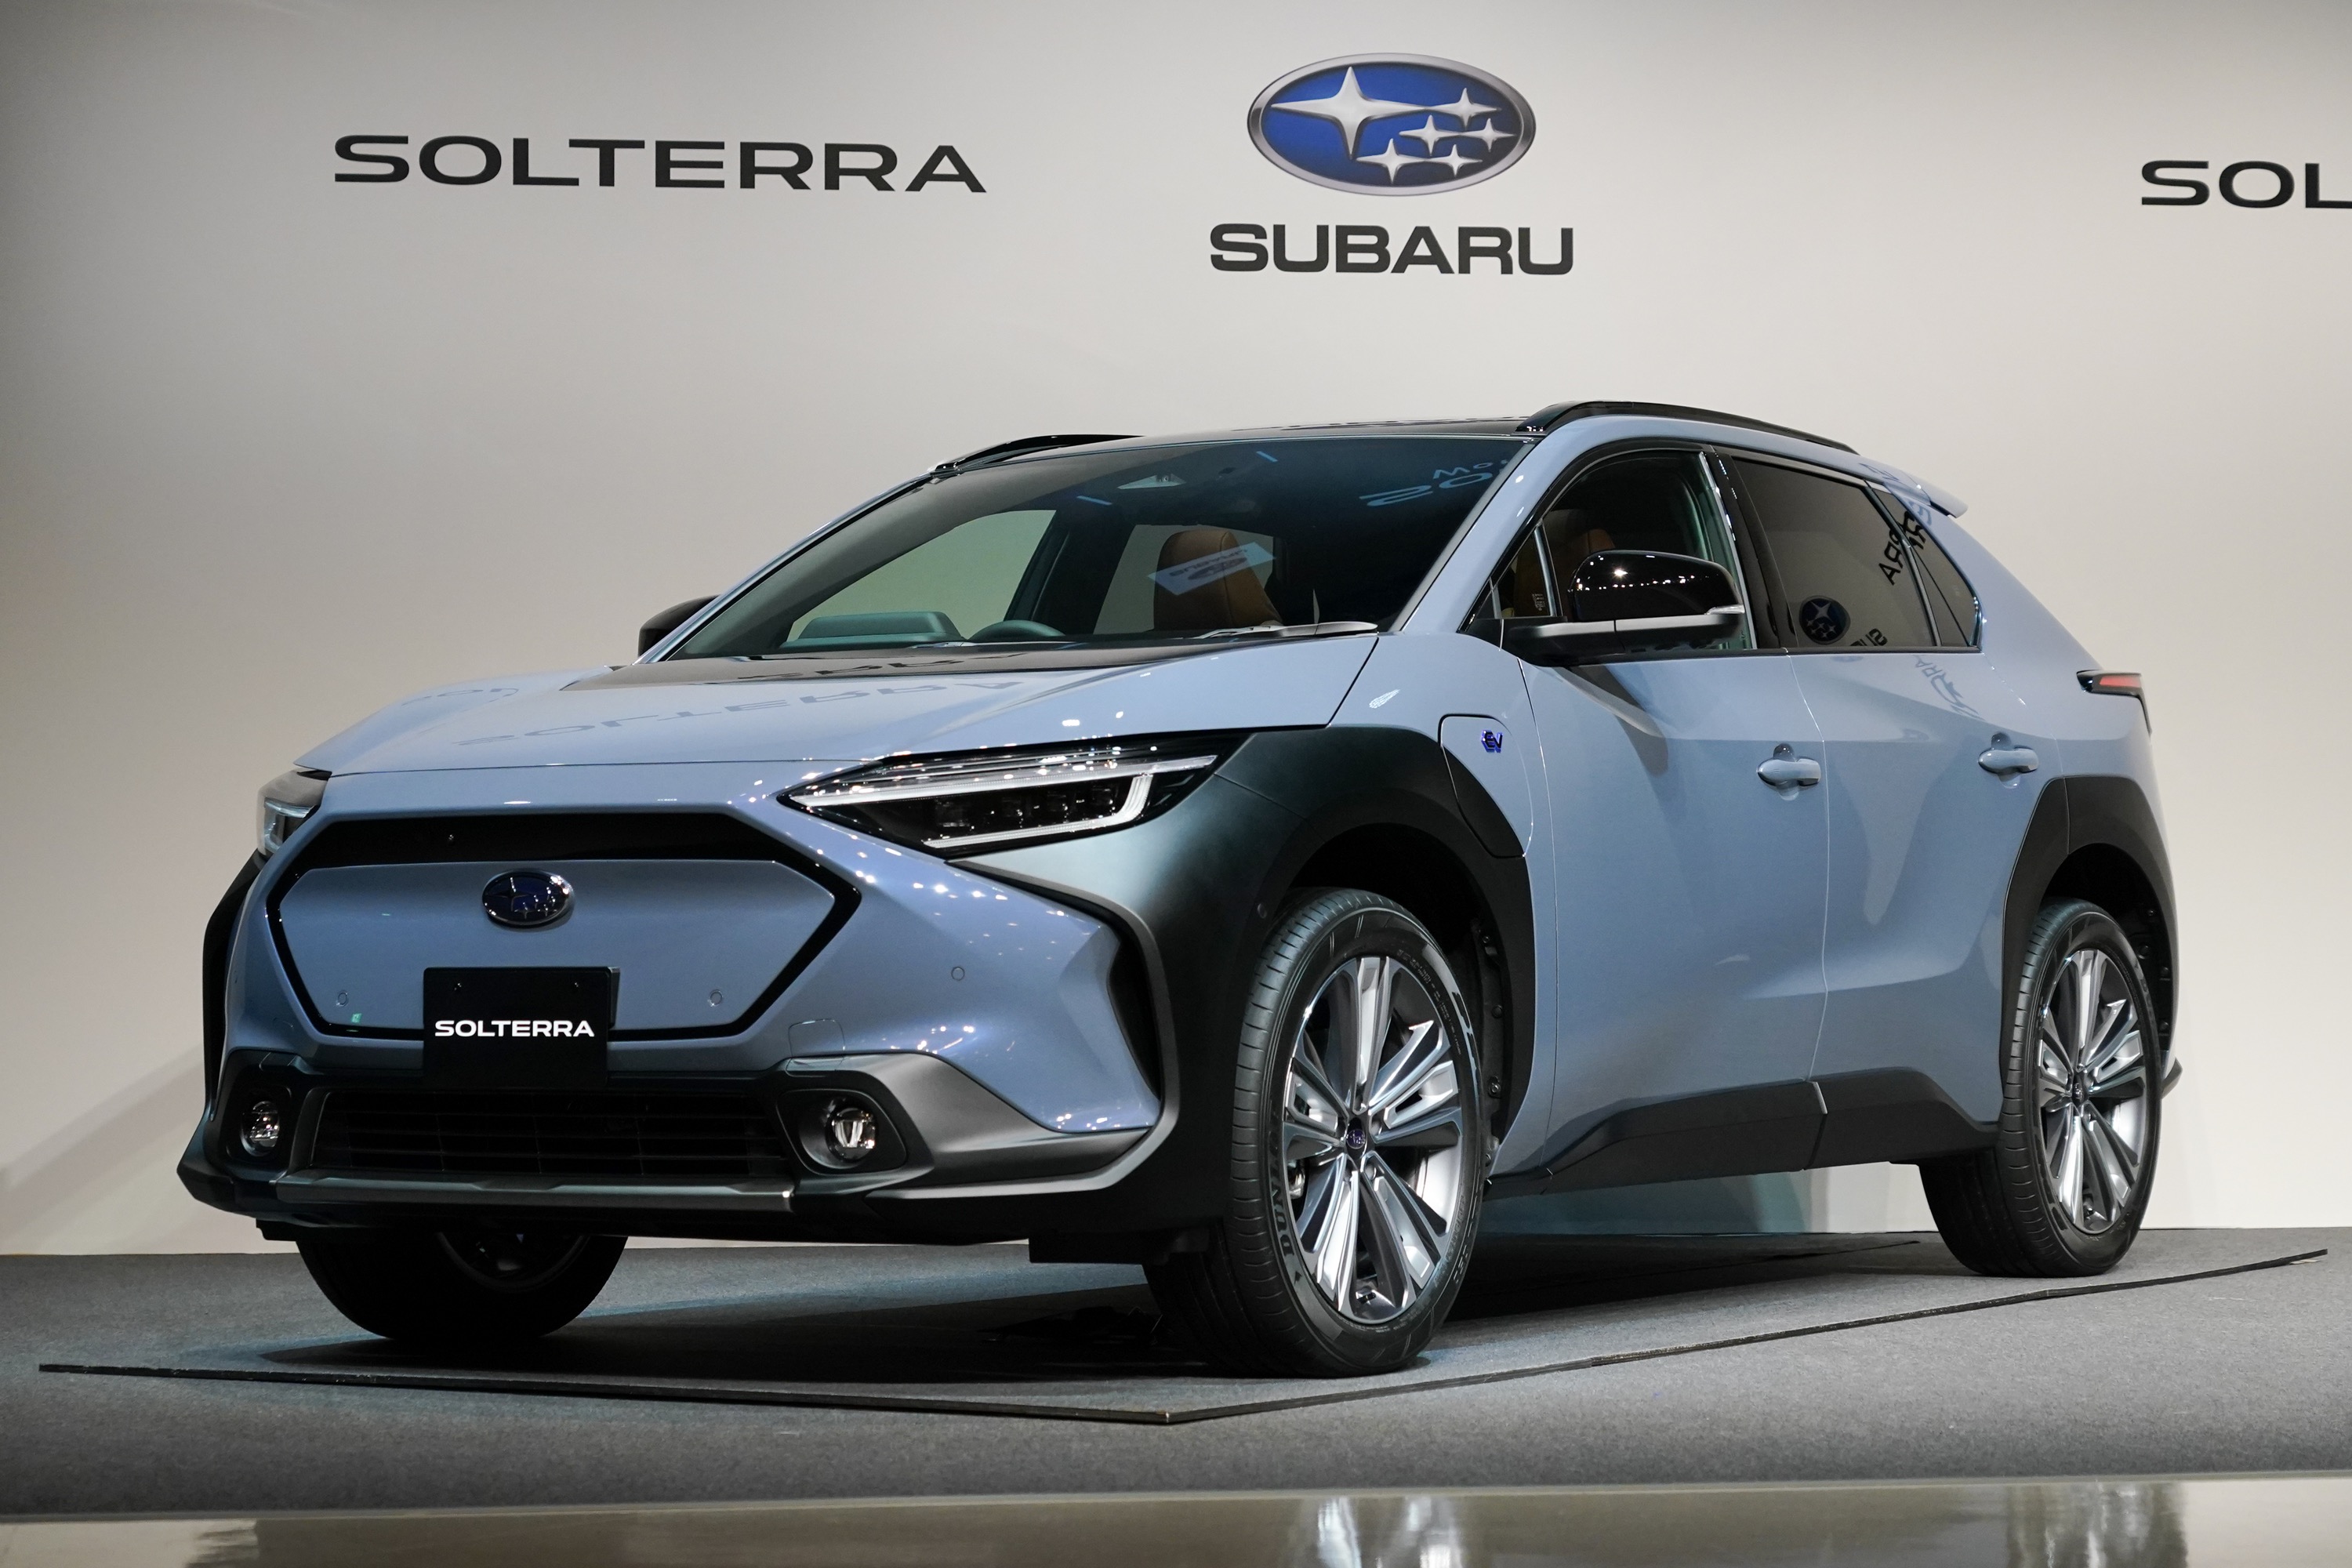 Subaru shows off its first electric vehicle, the Solterra SUV Ars Technica Almost Home Biz